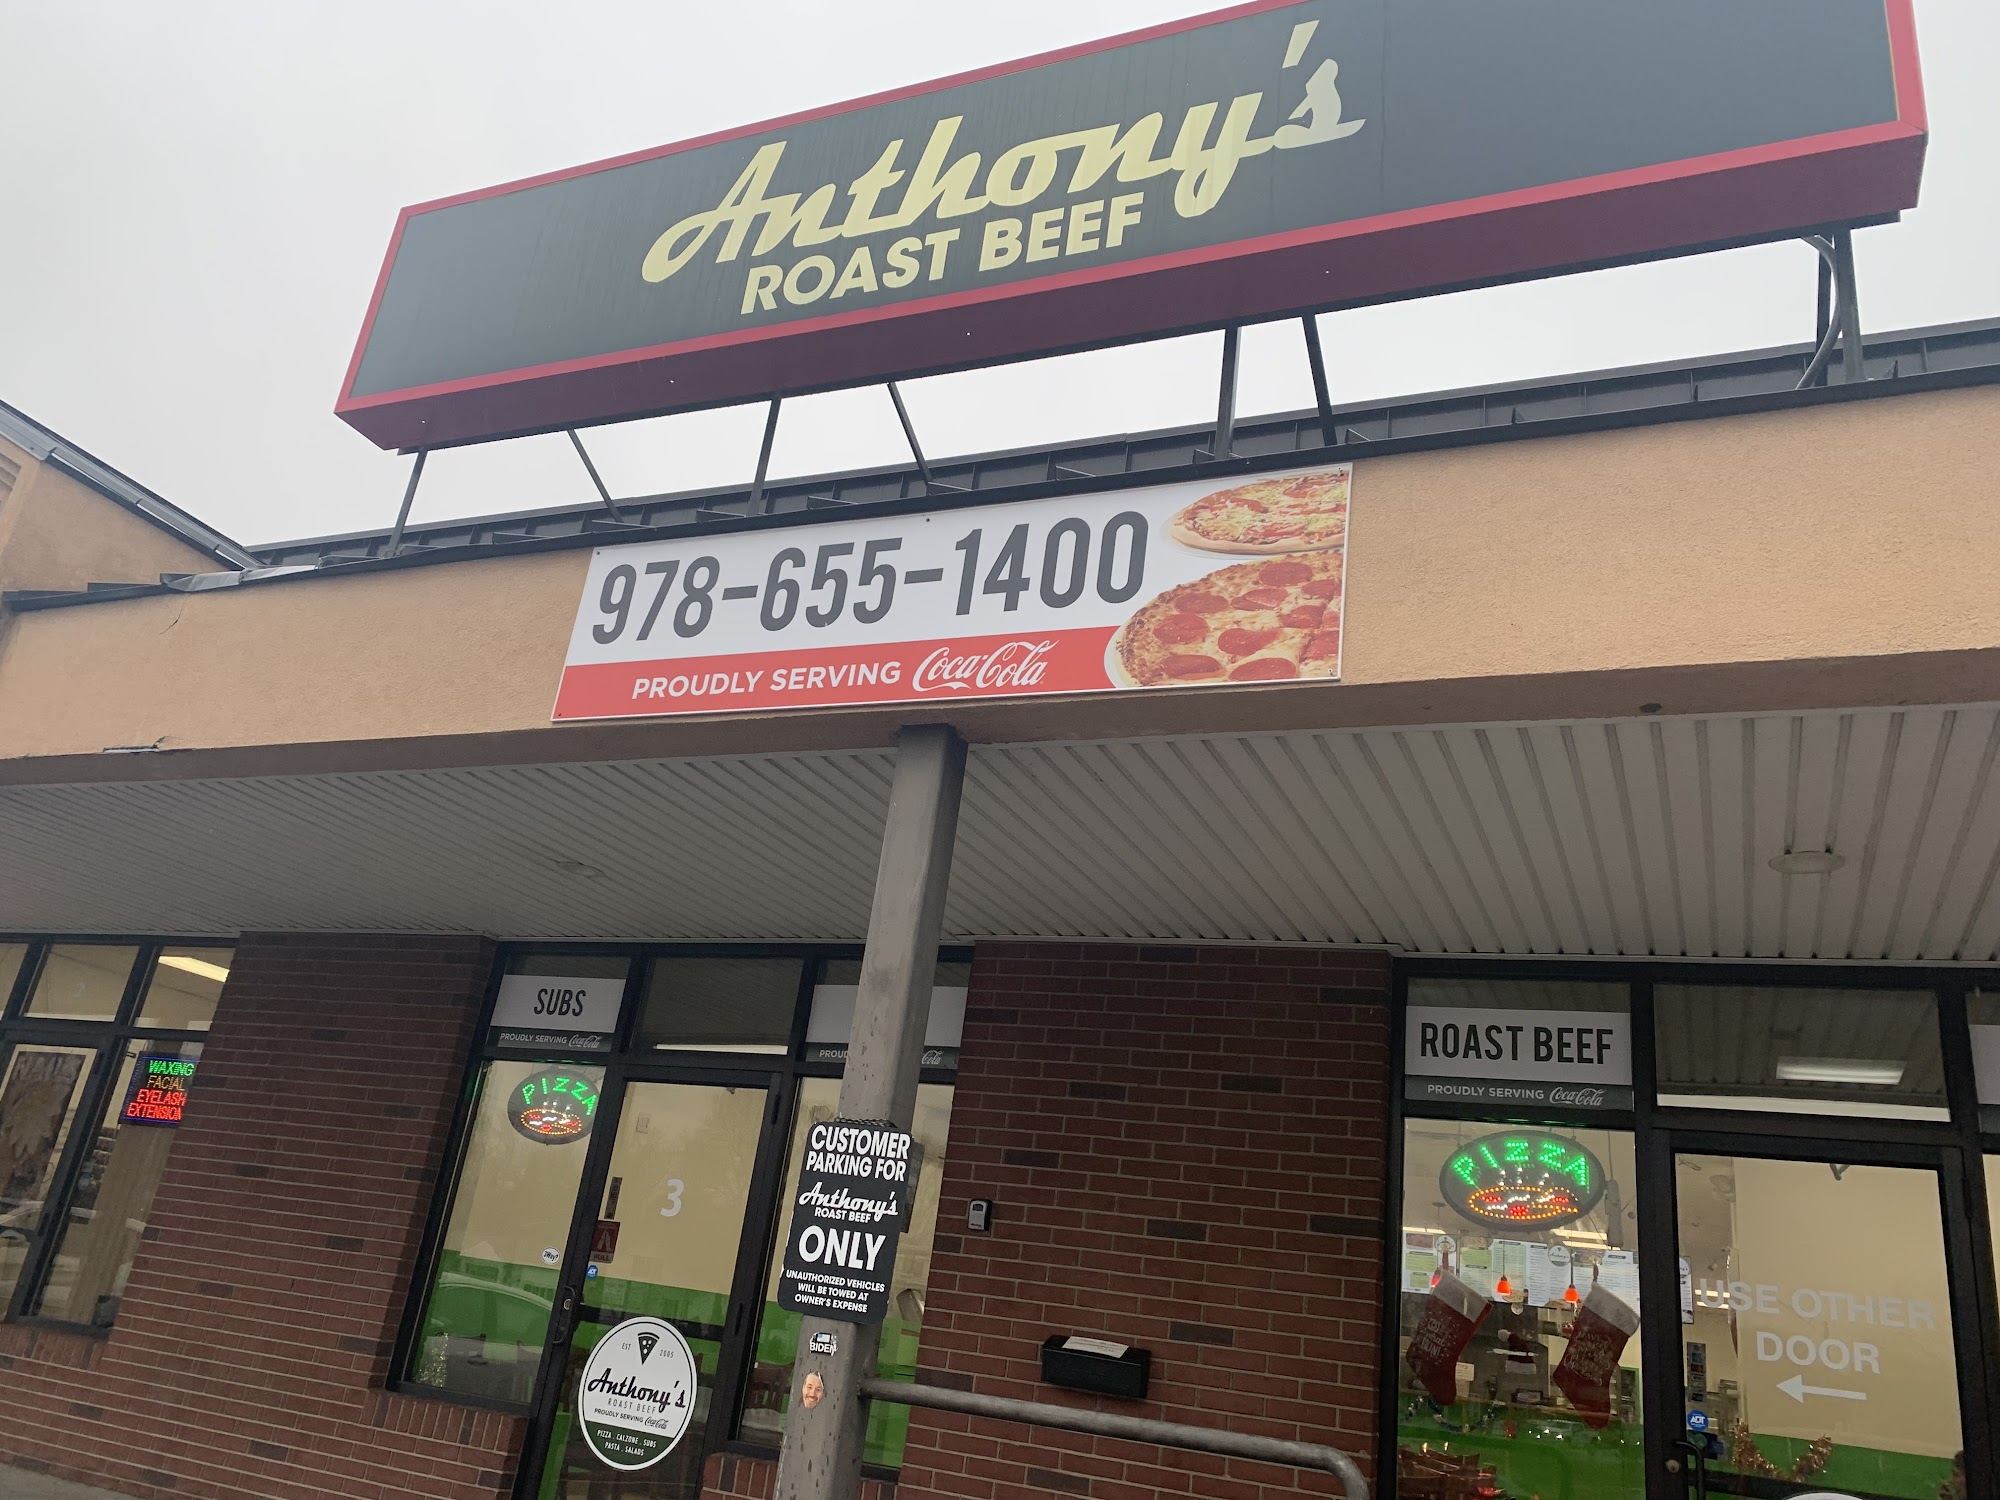 Anthony's Pizza Place | Best Roast Beef in Methuen | Delicious Pizza, Subs, Calzone & more